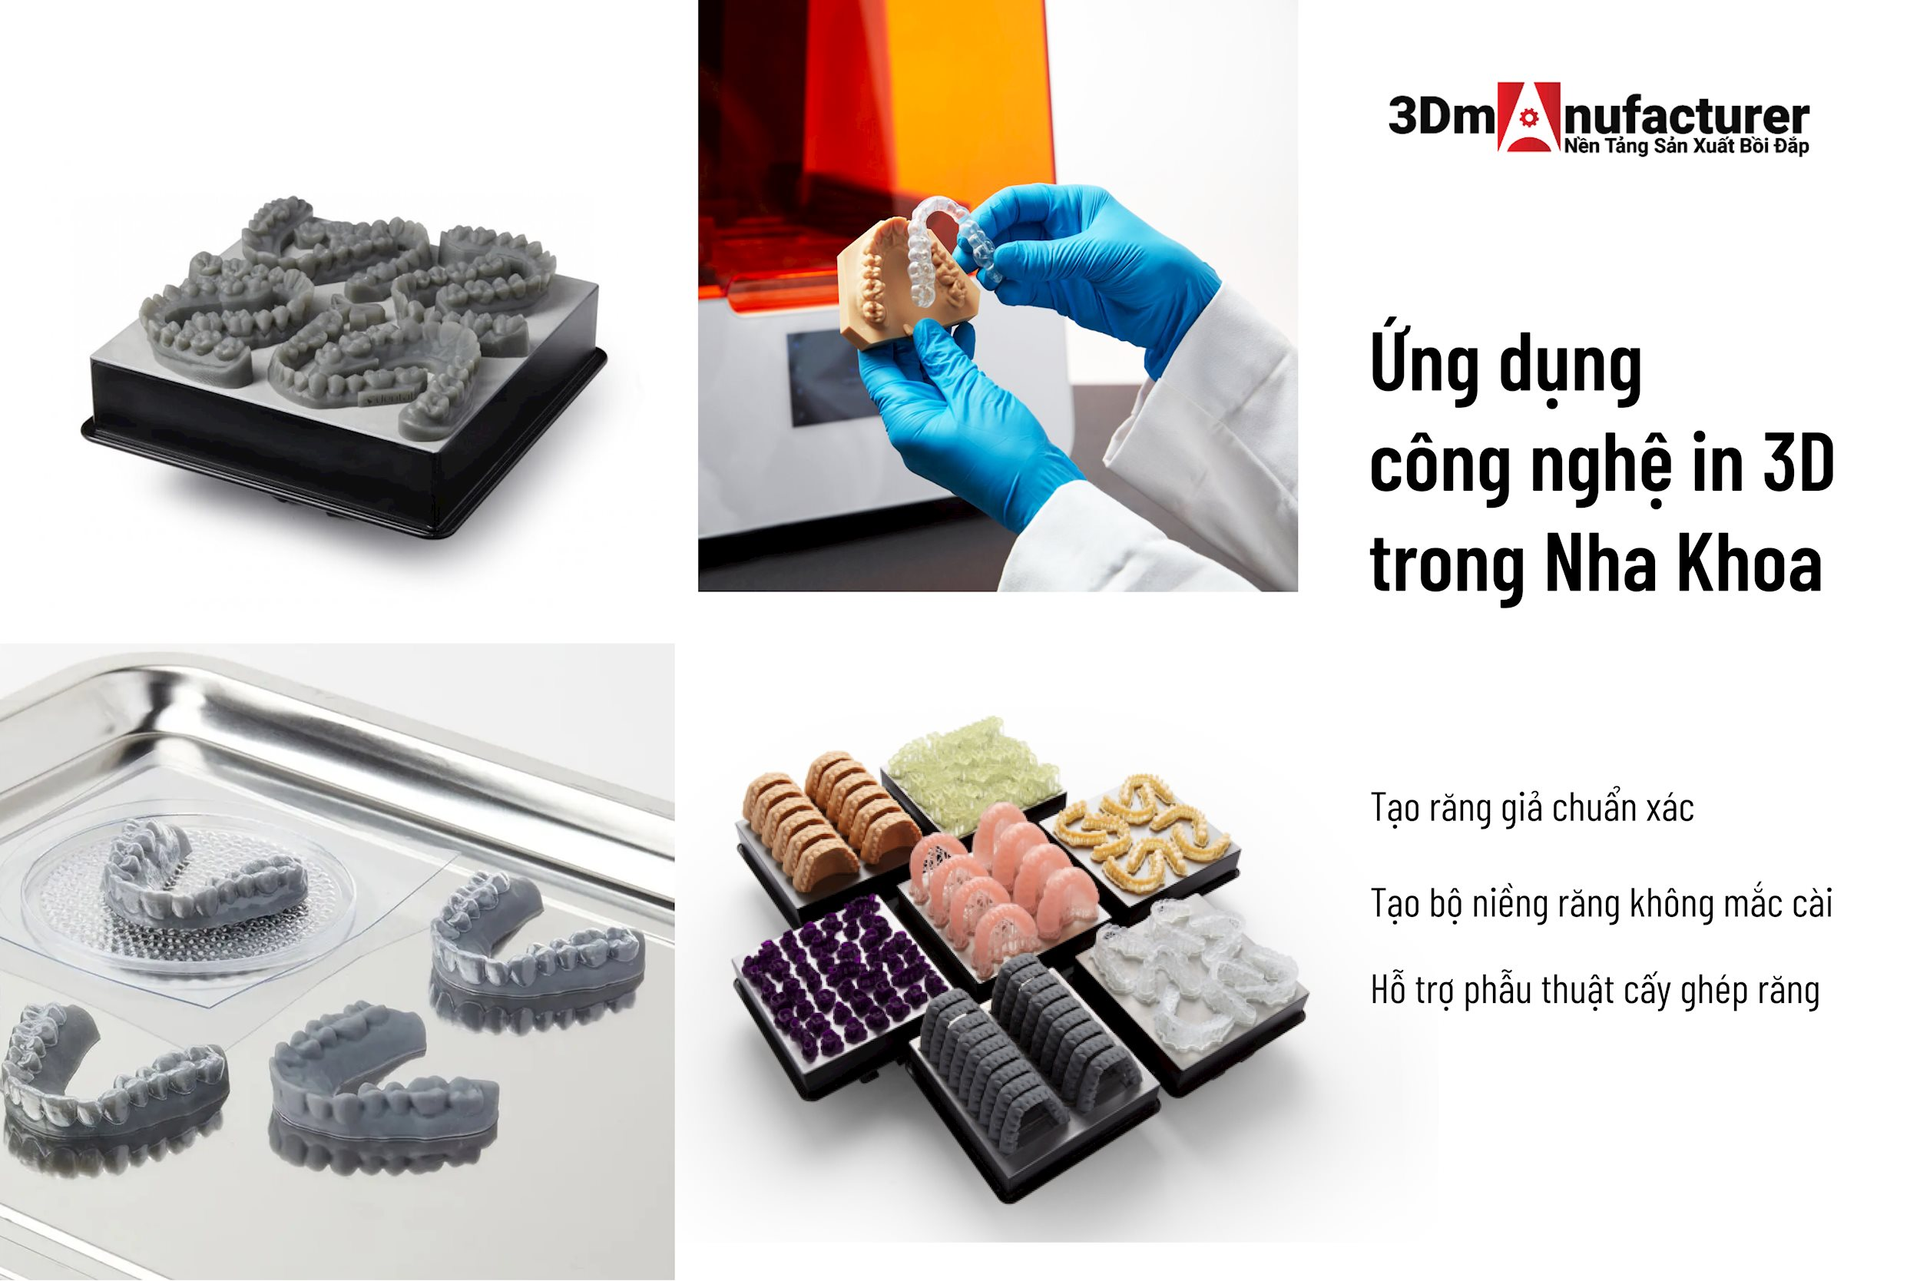 ung-dung-cong-nghe-in-3d-trong-lab-nha-khoa.png